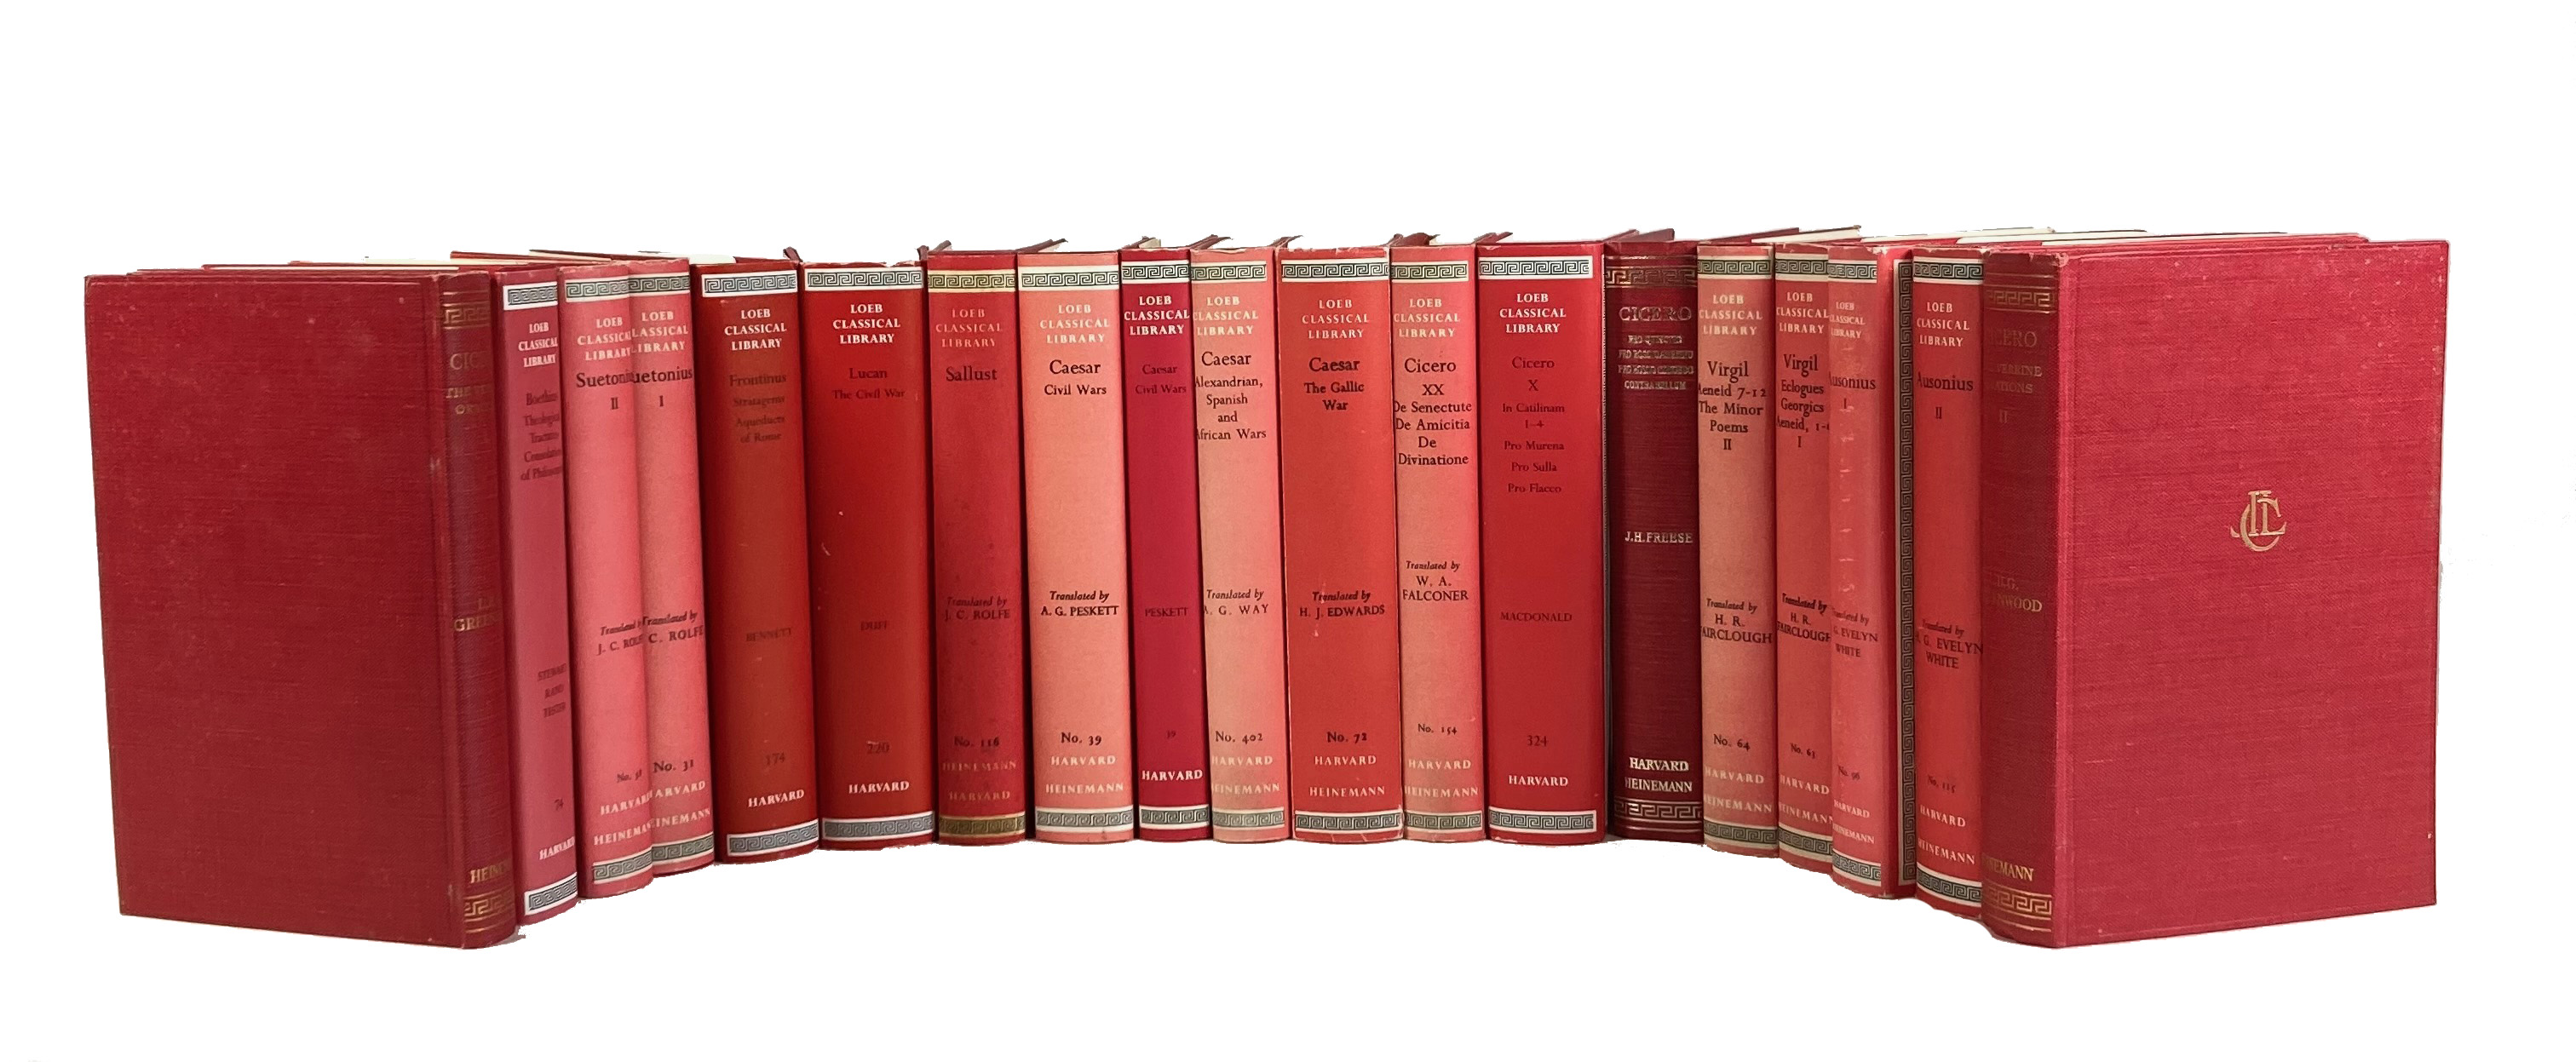 LOEB CLASSICAL LIBRARY. Latin authors & sets. (1925-2003). 19 vols. of the series